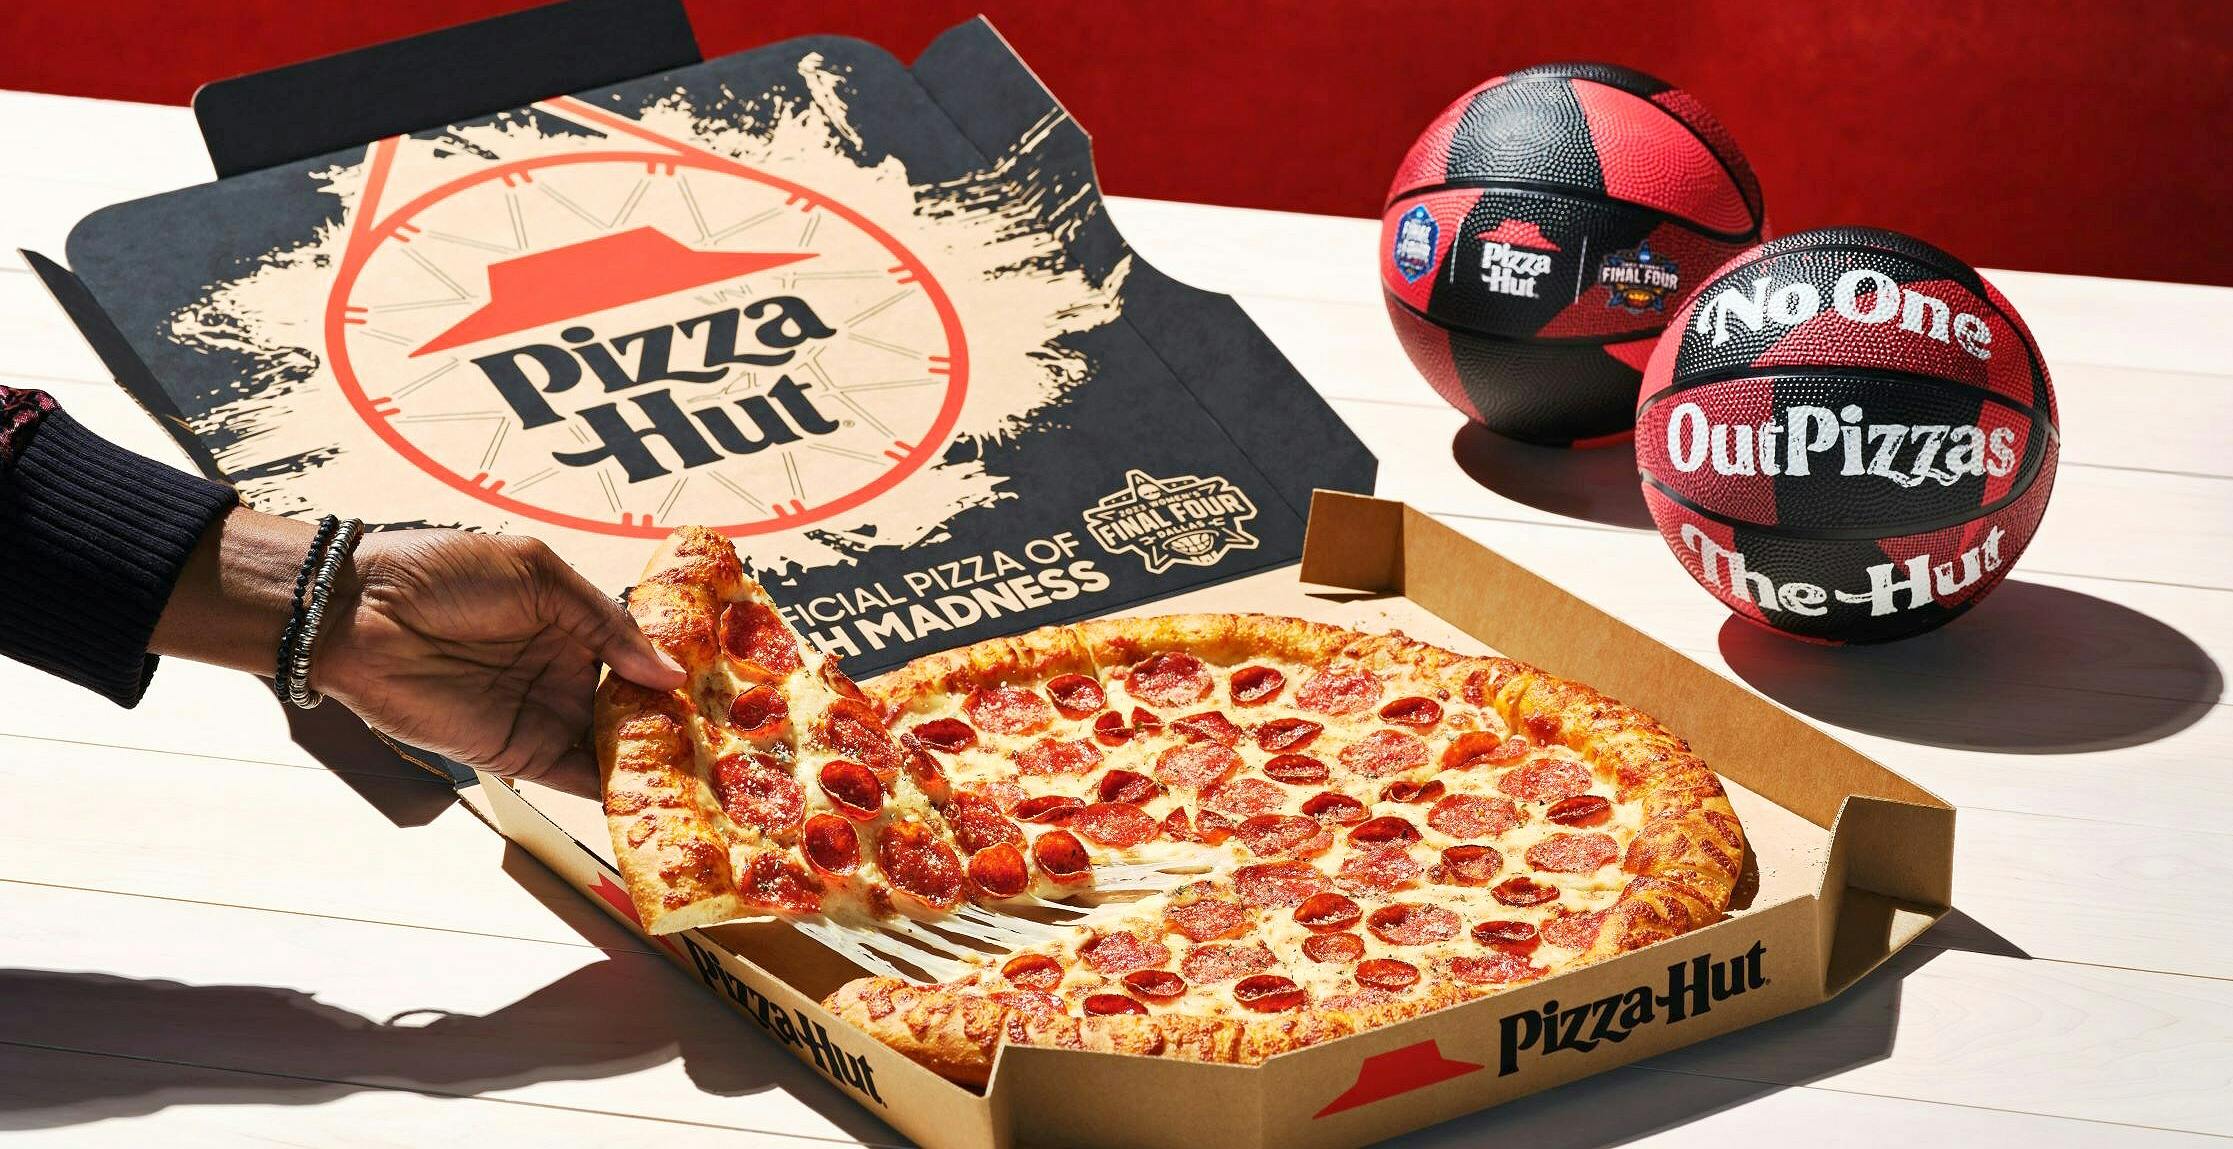 Those Pizza Hut Mini Basketballs From the '90s Are Back!